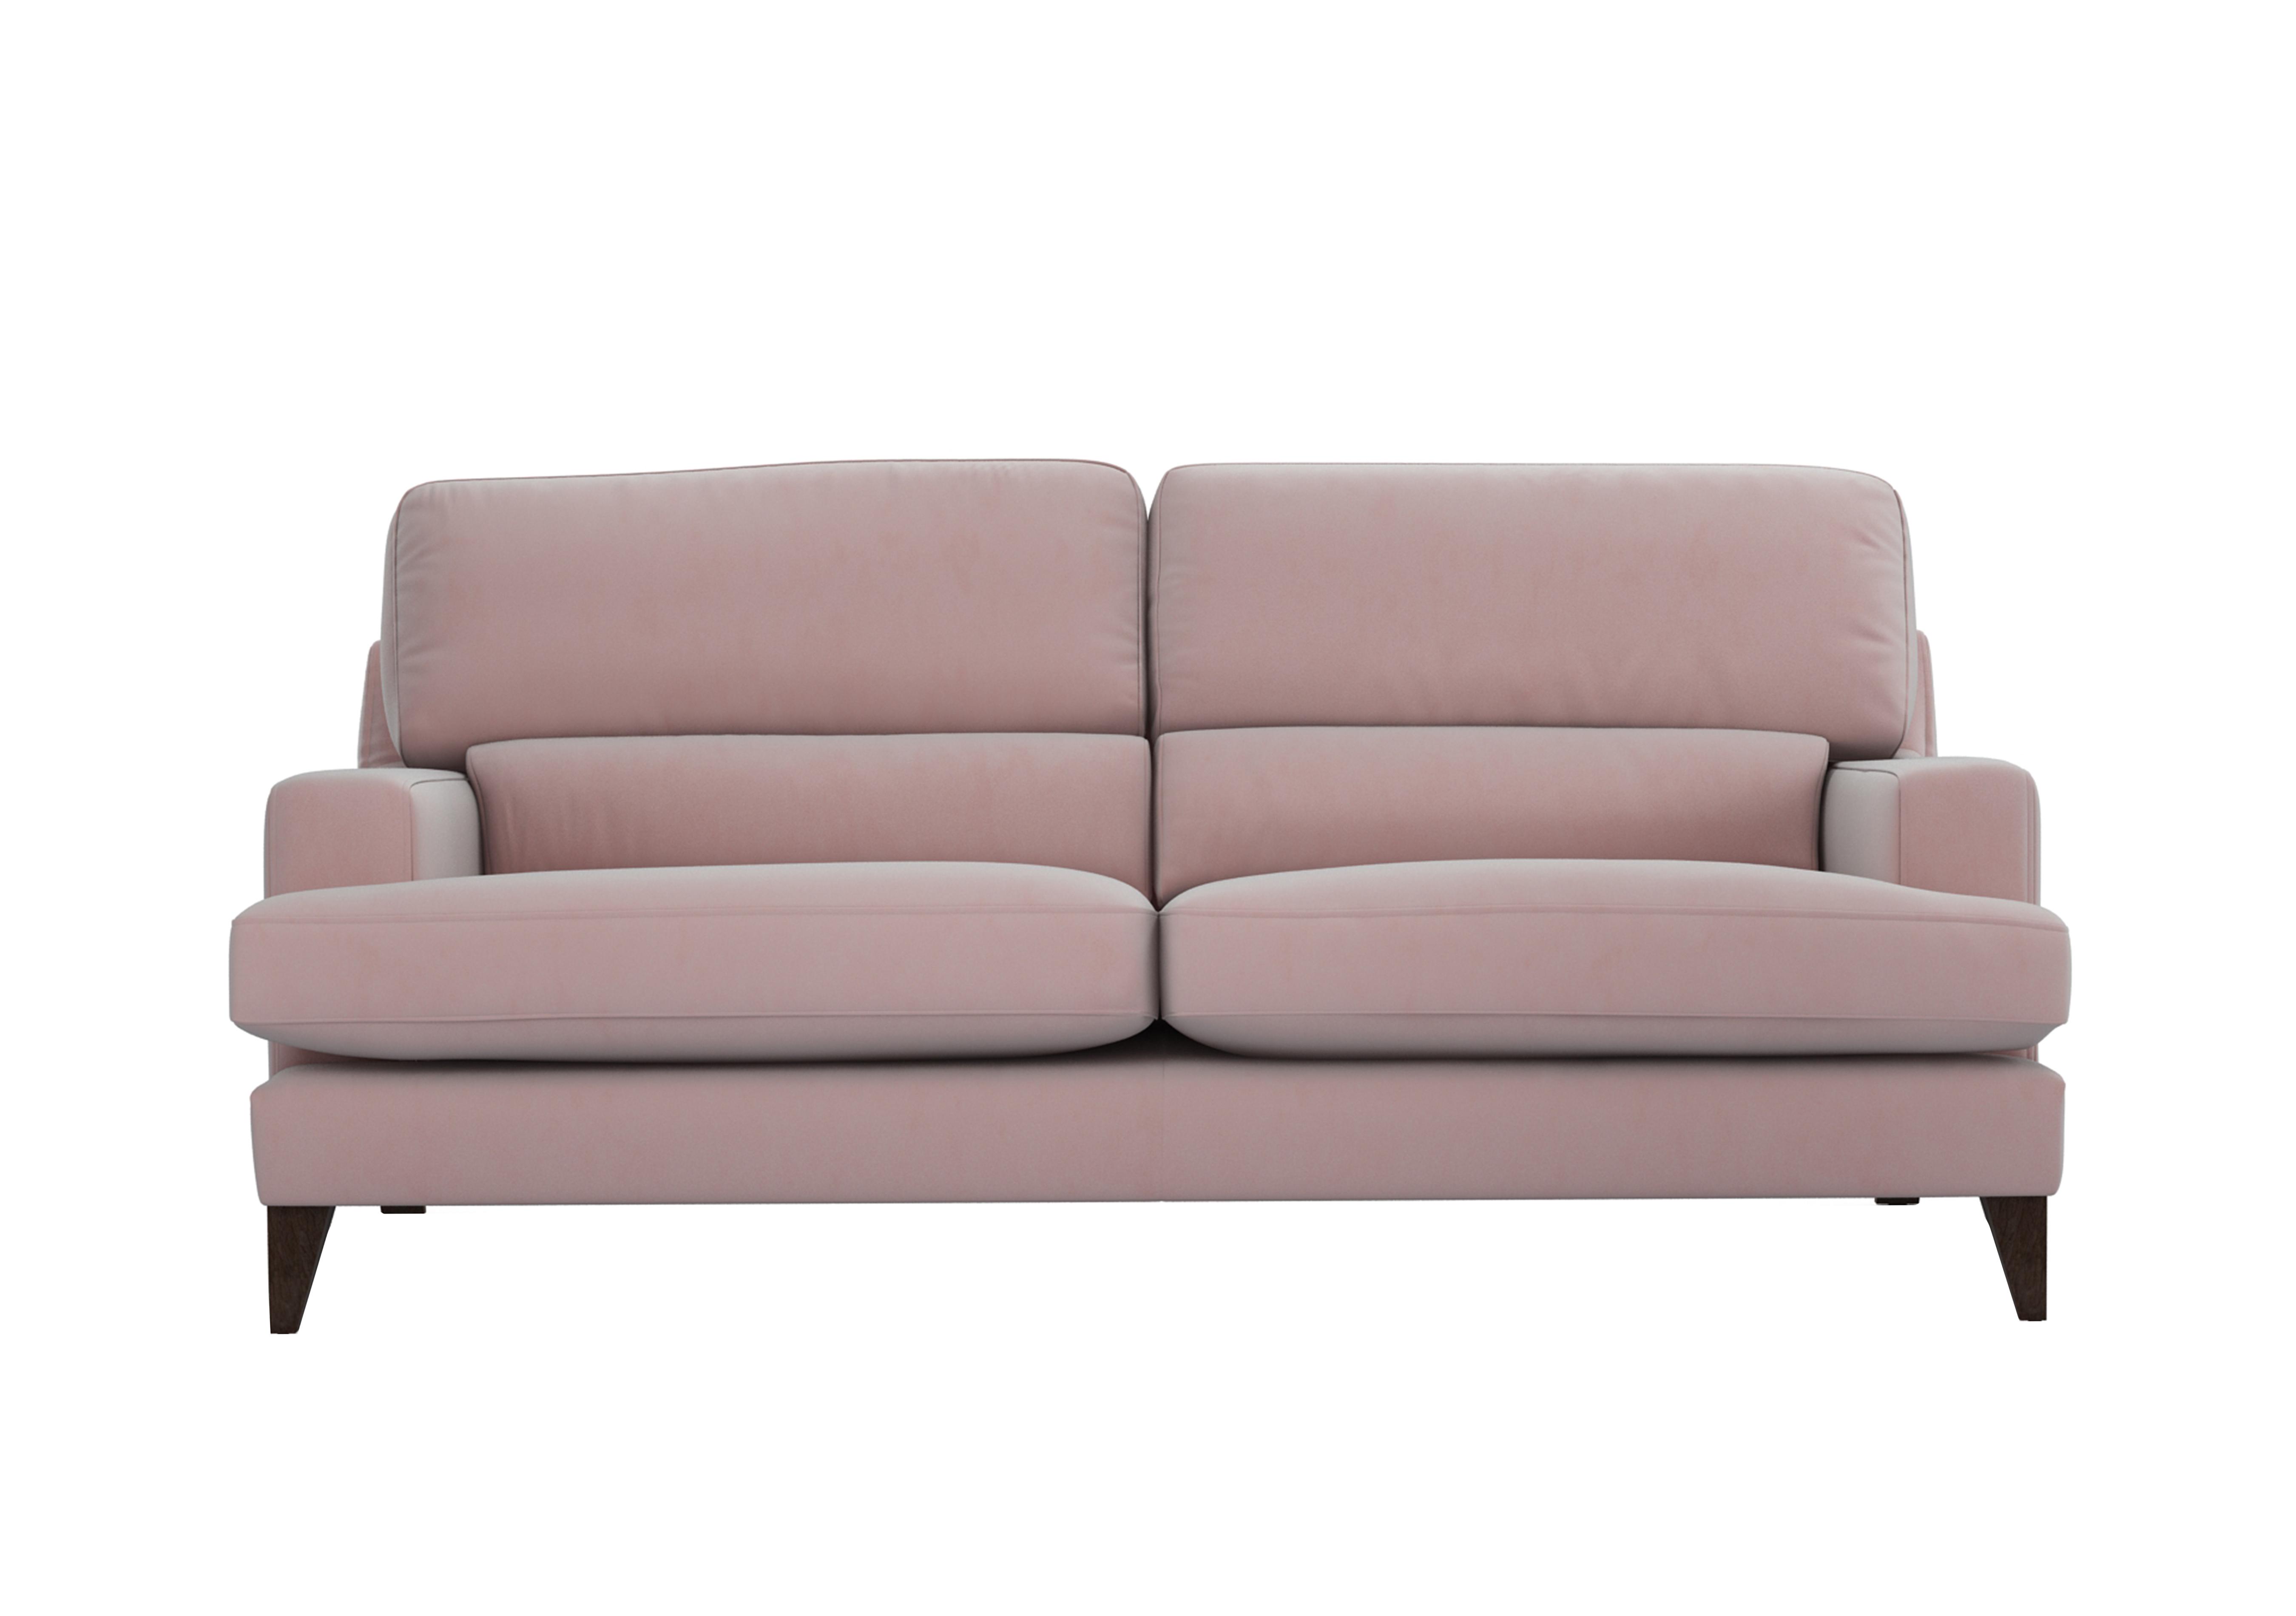 Romilly 3 Seater Fabric Sofa in Cot256 Cotton Candy Wa Ft on Furniture Village